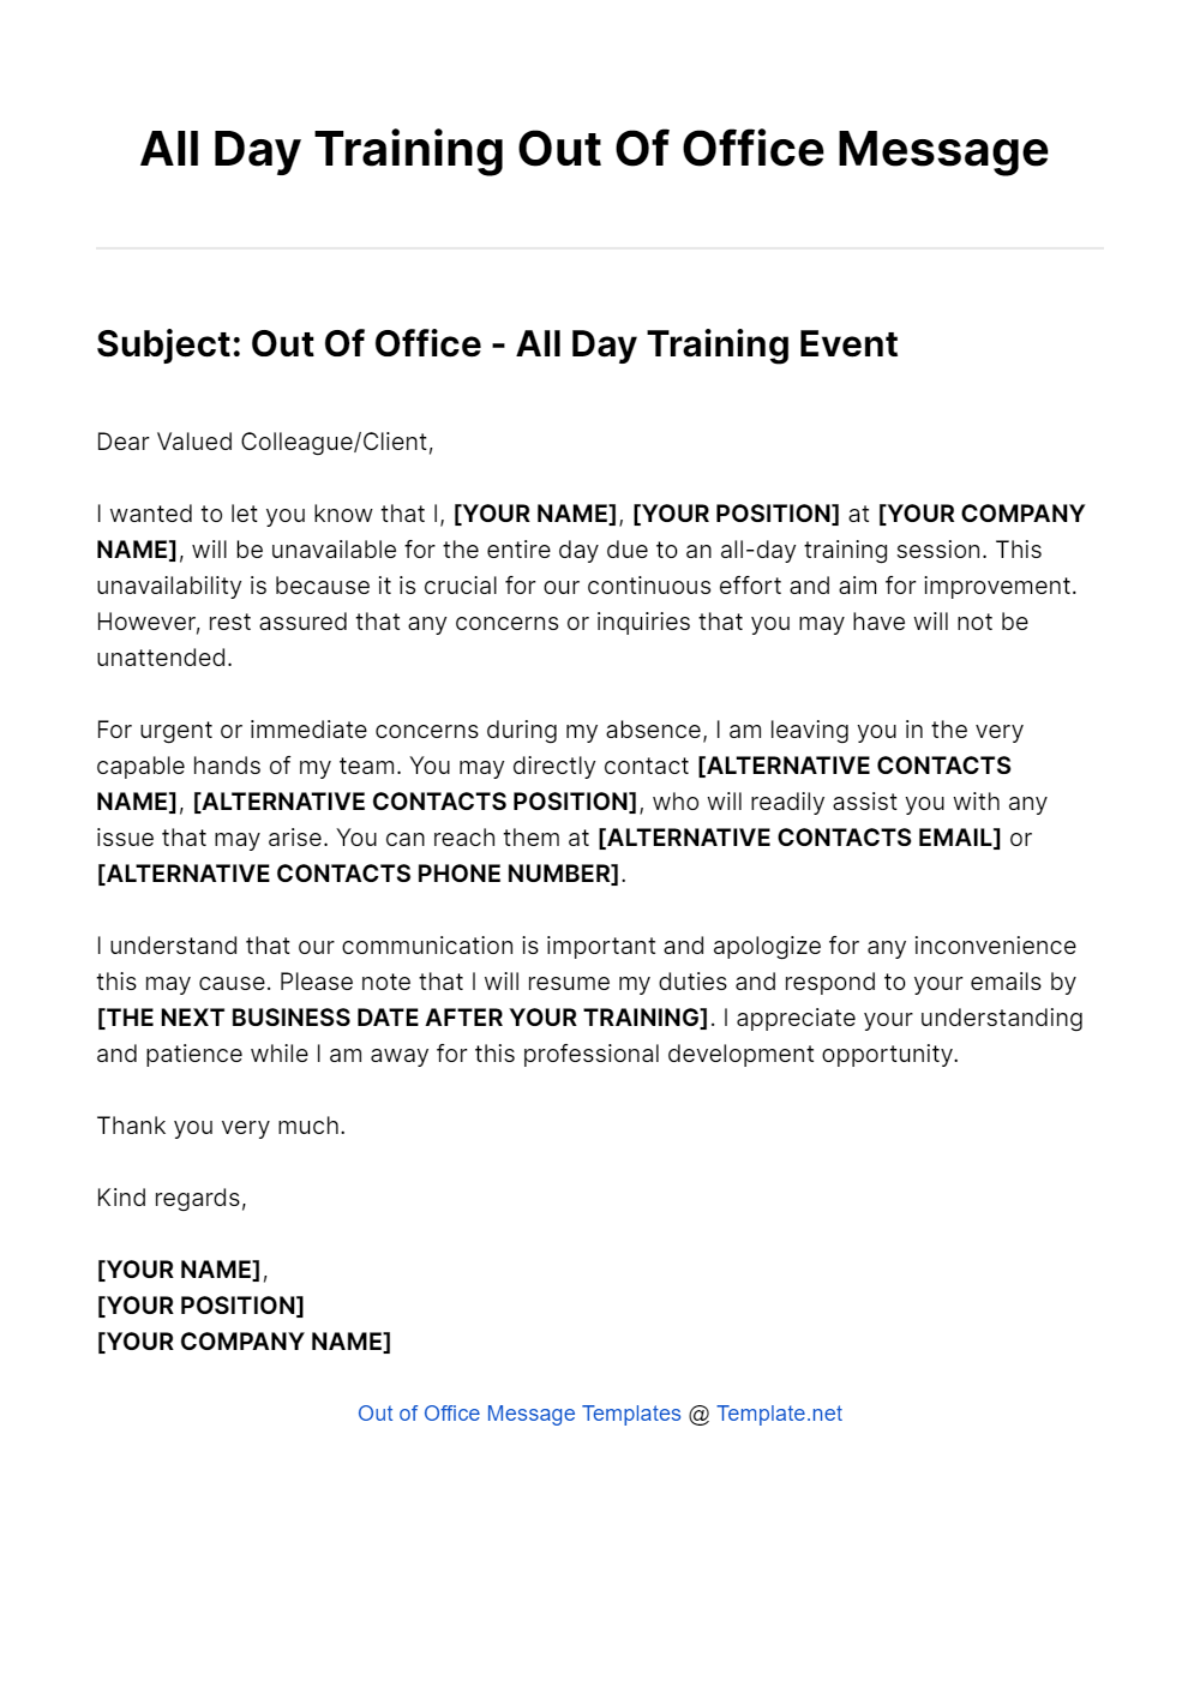 All Day Training Out Of Office Message Template